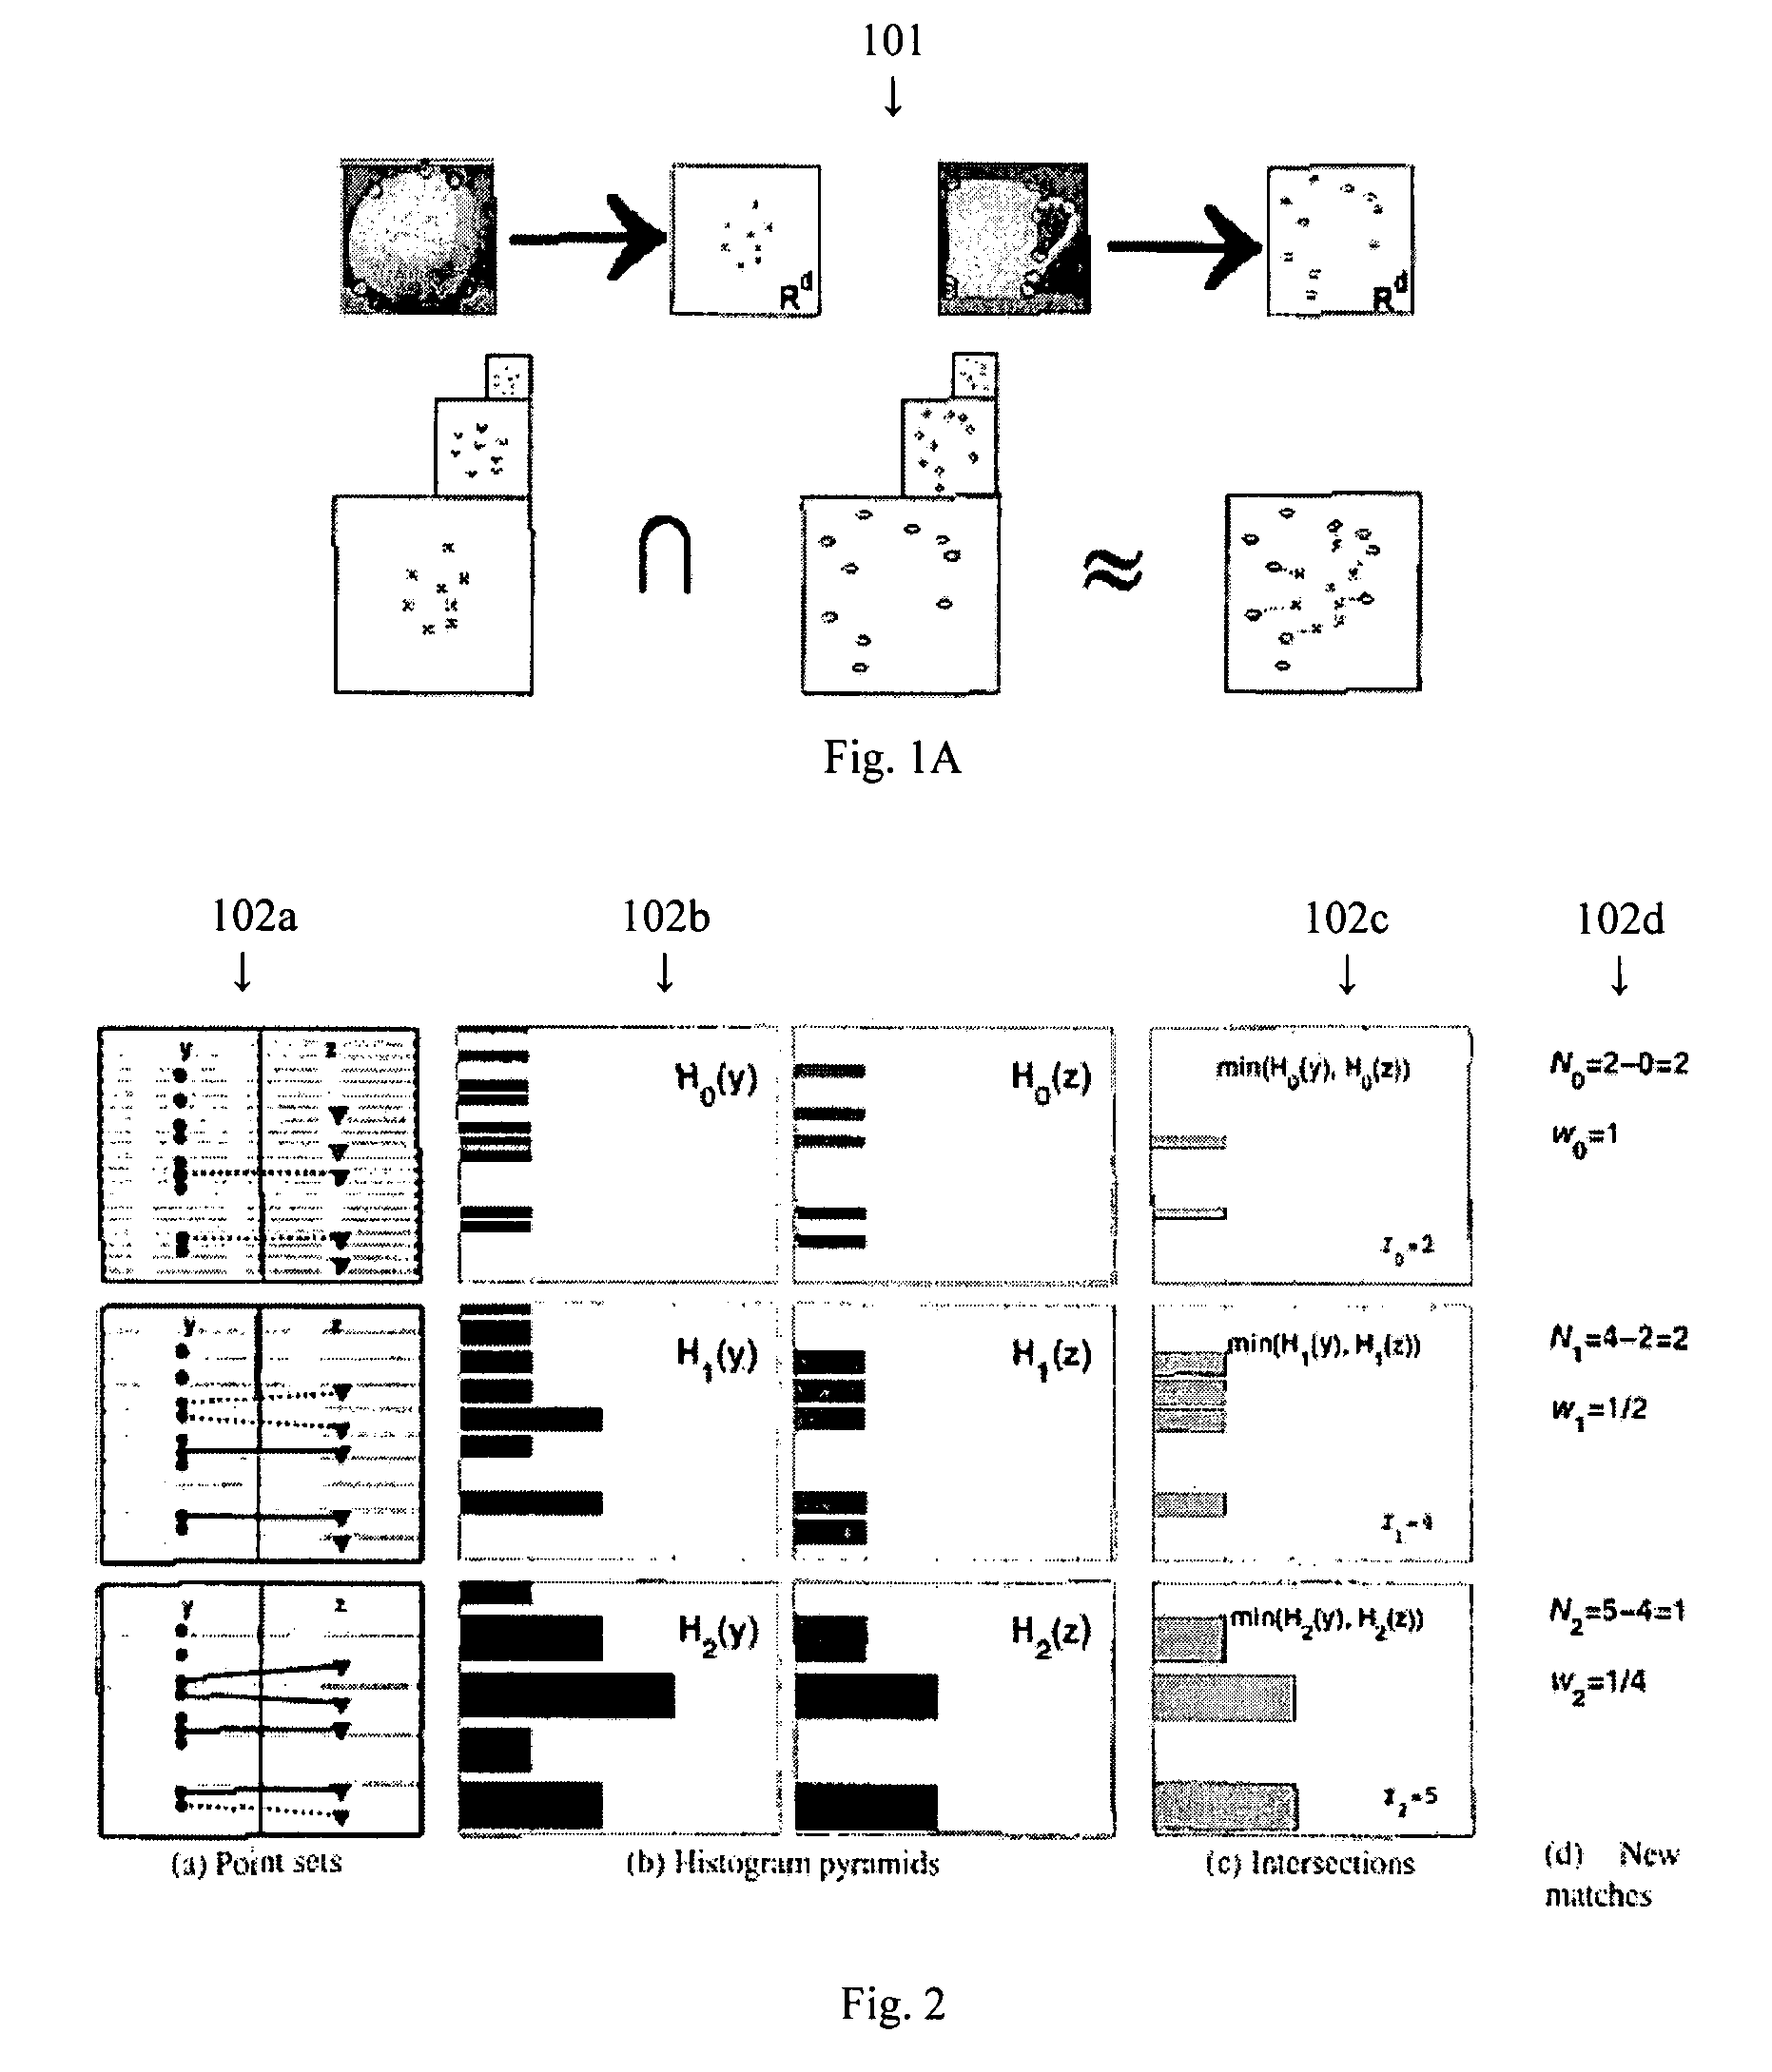 Pyramid match kernel and related techniques